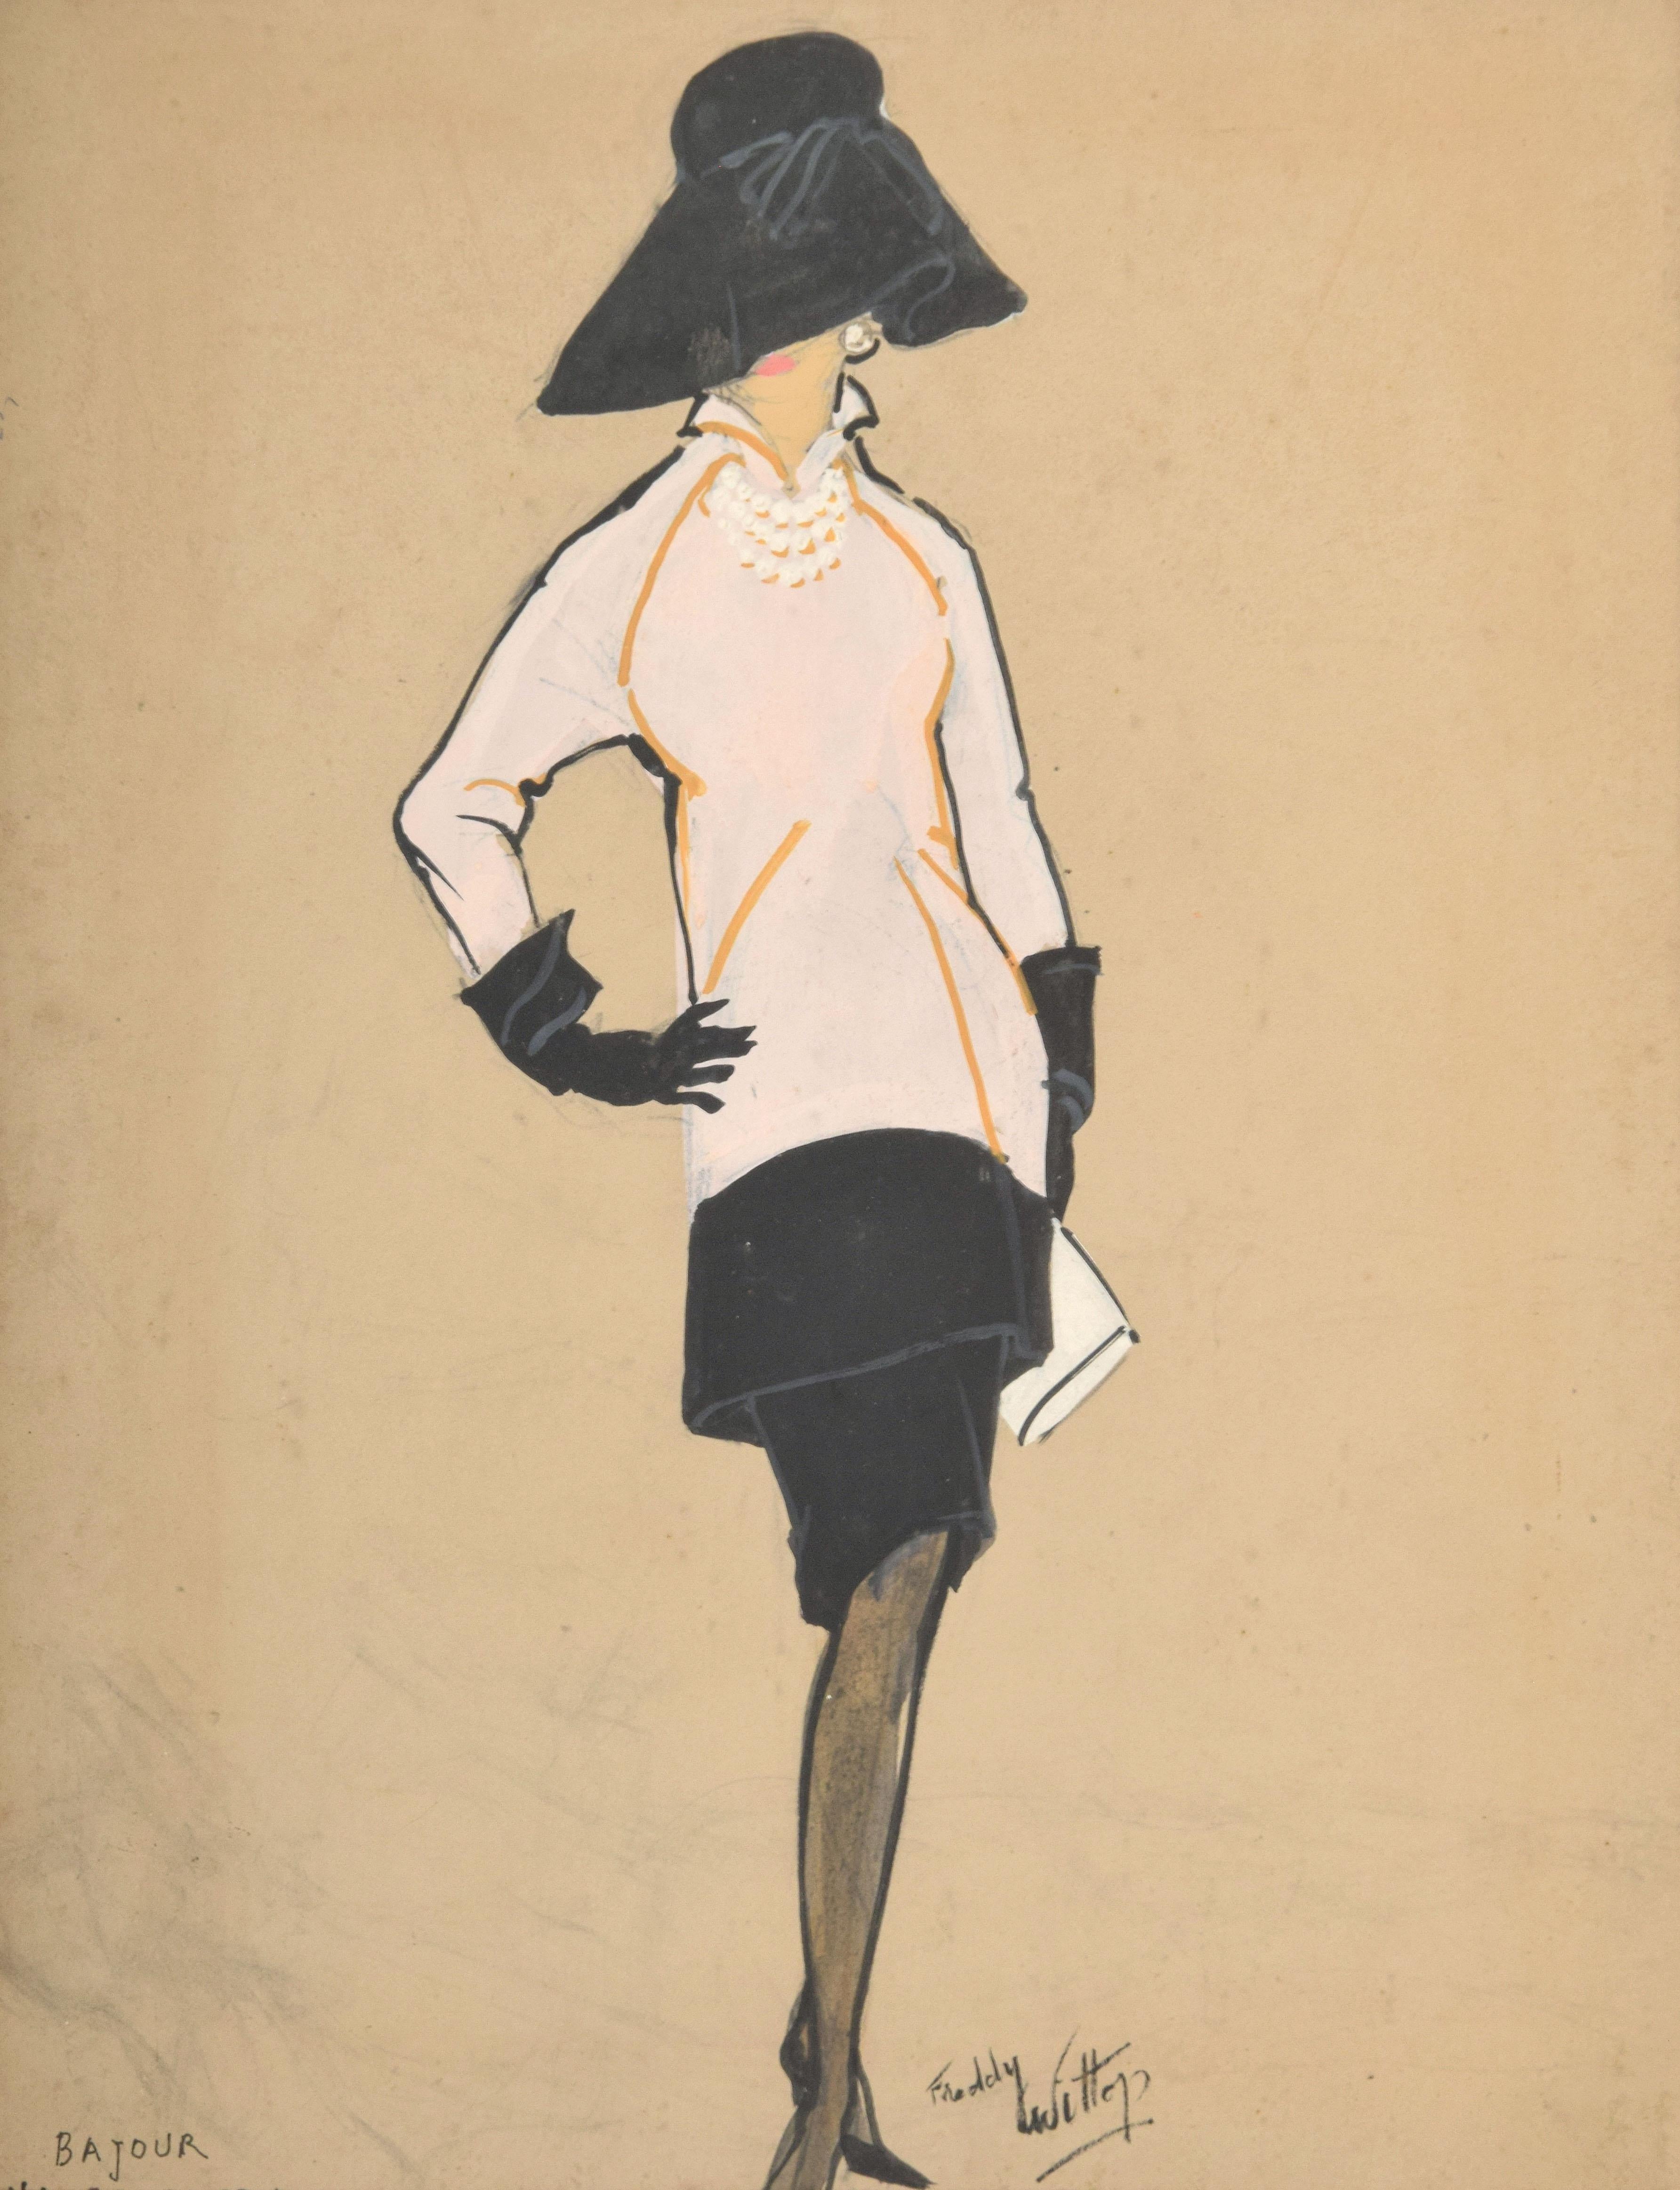 Additional Information: Freddy Wittop’s drawing depicts one of the costumes he designed for “Bajour”. Costume designer Freddy Wittop won a Tony Award for his work on “Hello, Dolly!” and was also the recipient of a TDF Irene Sharaff Award for